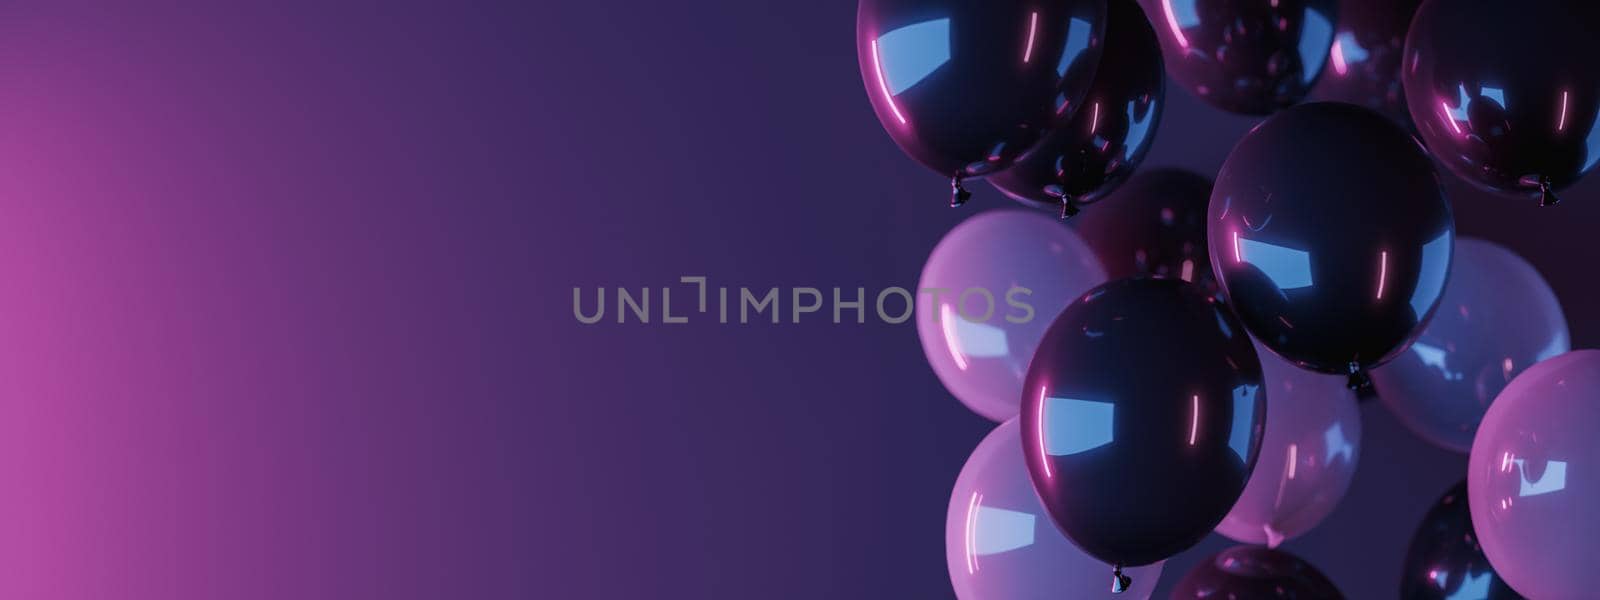 header with black and white out of focus balloons and blue and pink neon lighting. 3d rendering